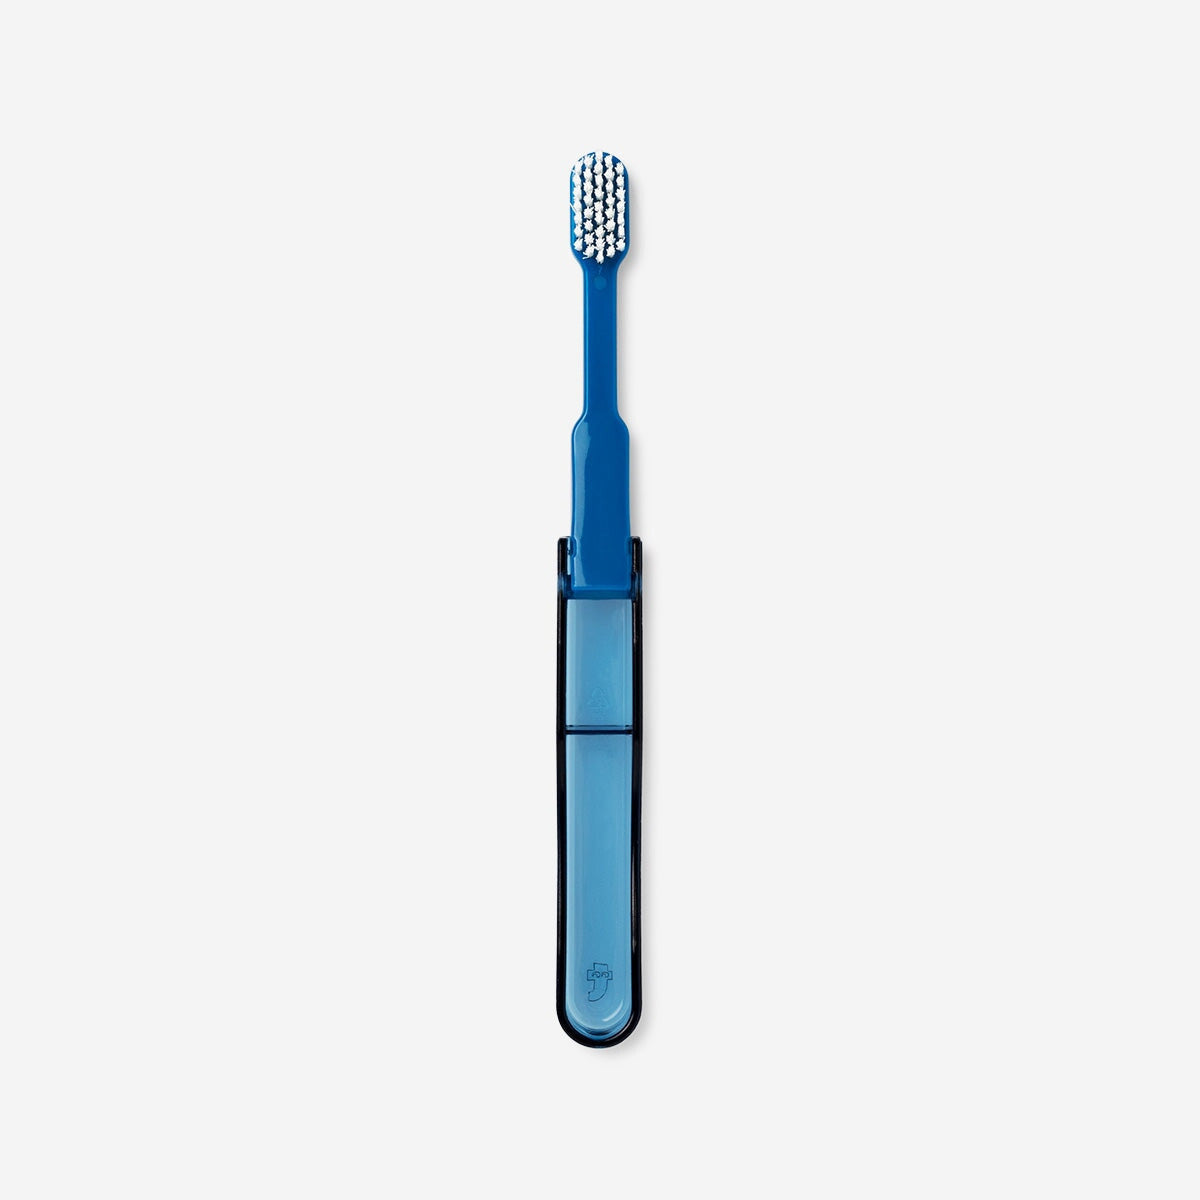 Travel toothbrush. Foldable Personal care Flying Tiger Copenhagen 